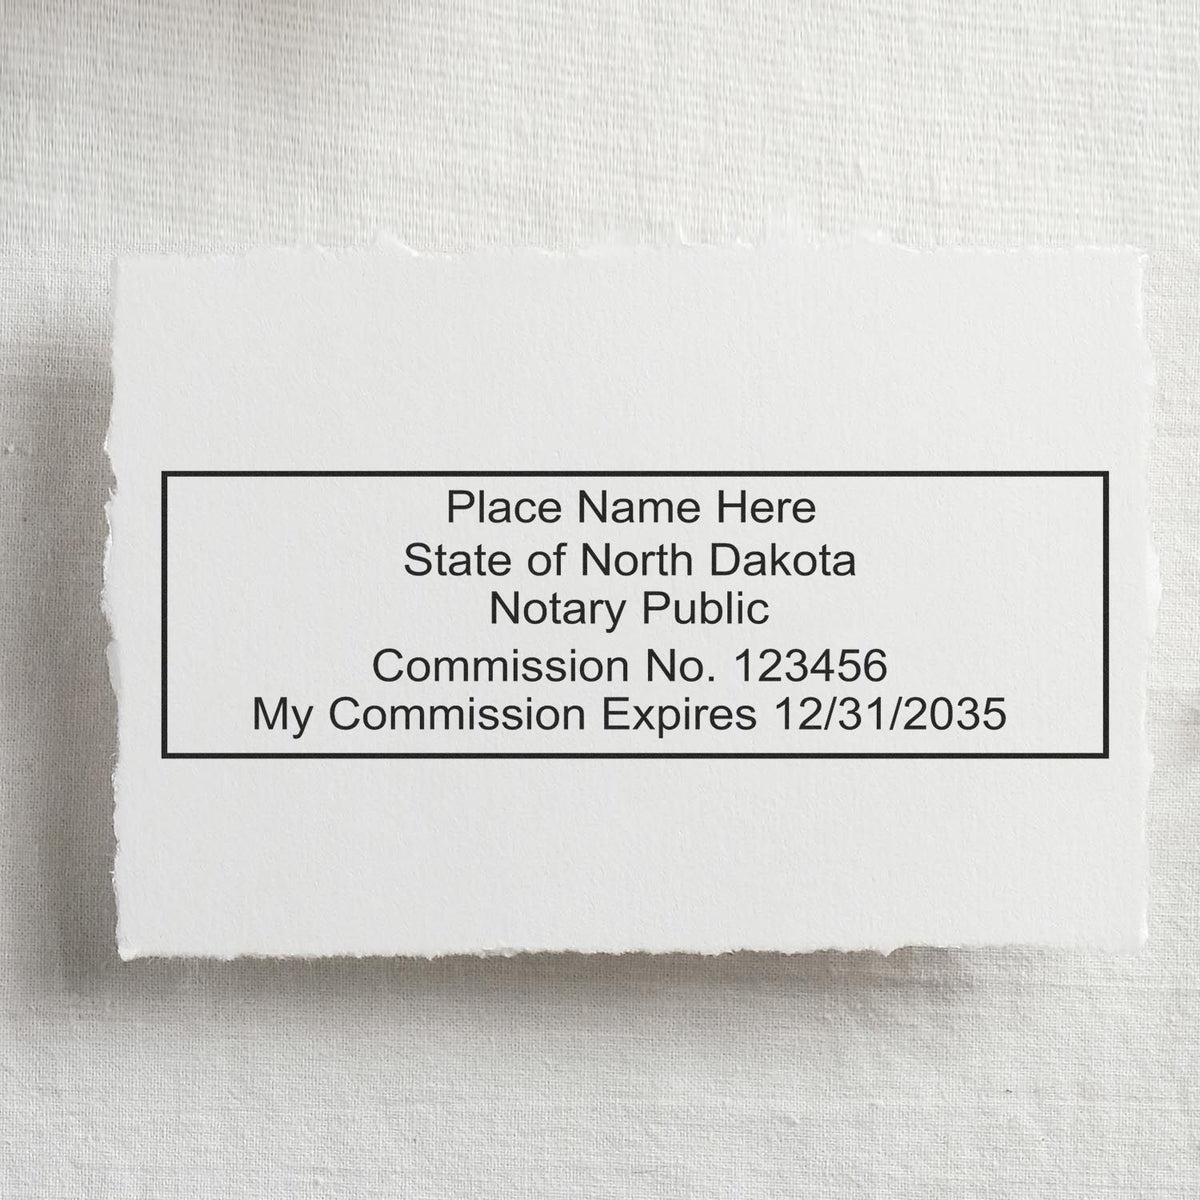 A lifestyle photo showing a stamped image of the MaxLight Premium Pre-Inked North Dakota Rectangular Notarial Stamp on a piece of paper